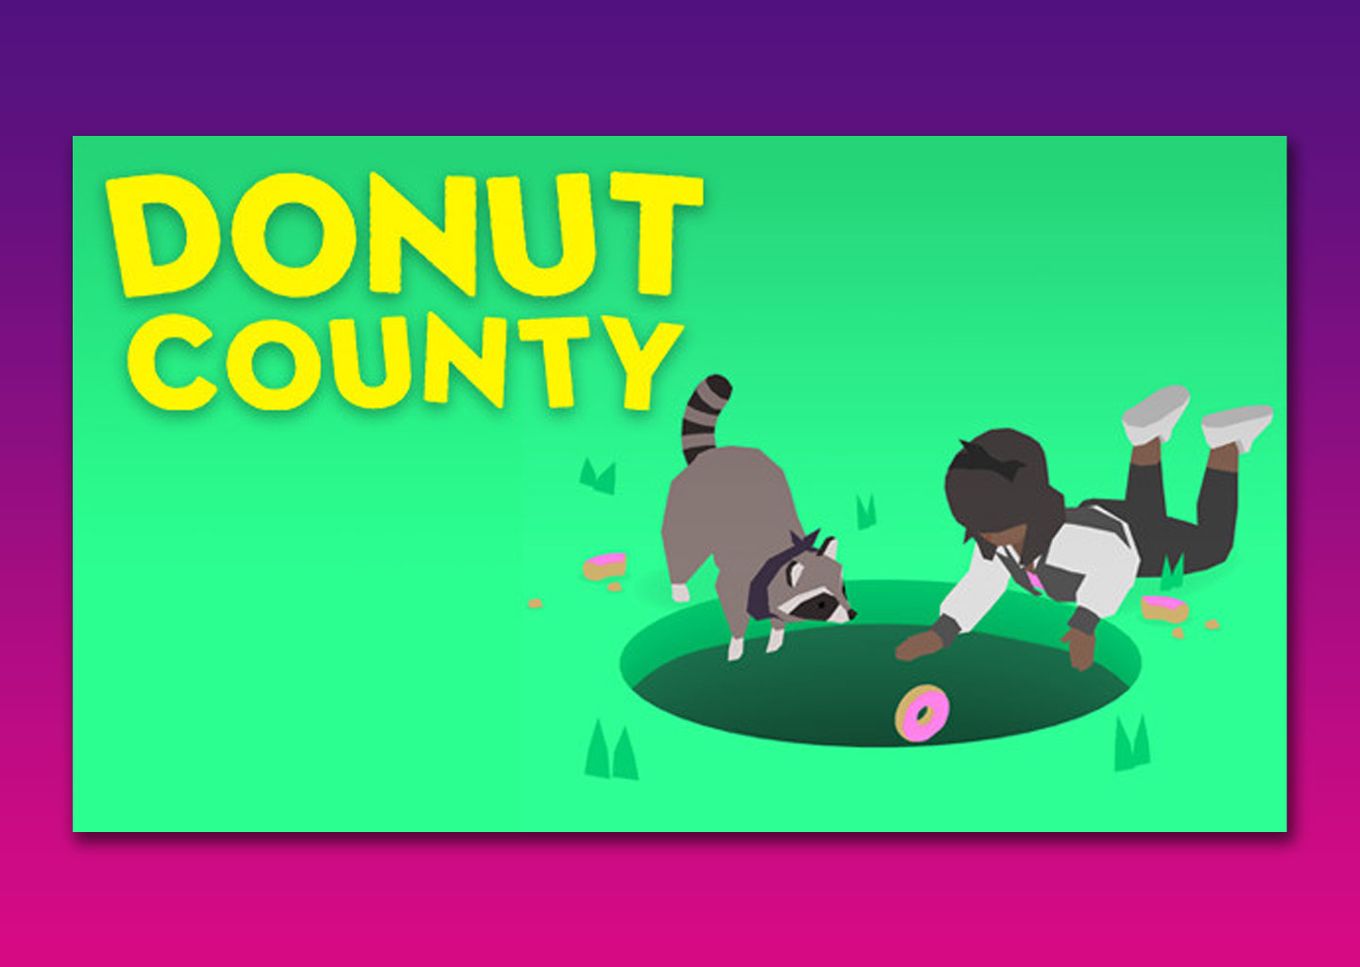 Donut County - Game For Apple Pencil